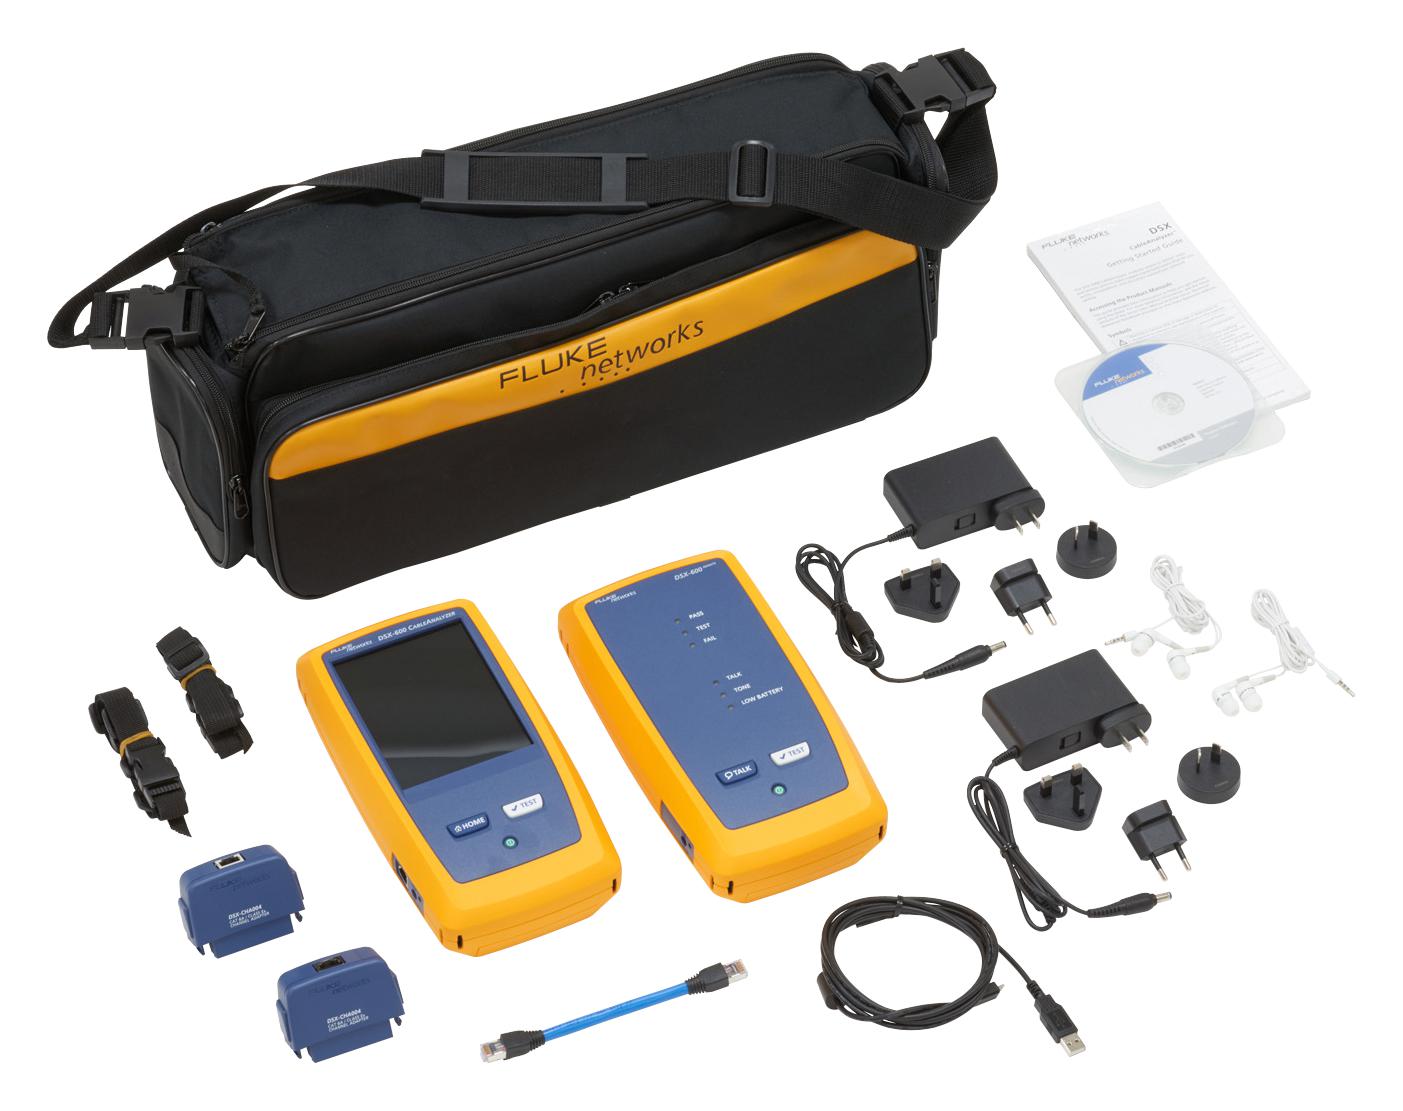 DSX-602 INT NETWORK CABLE ANALYSER, WIFI, LCD FLUKE NETWORKS